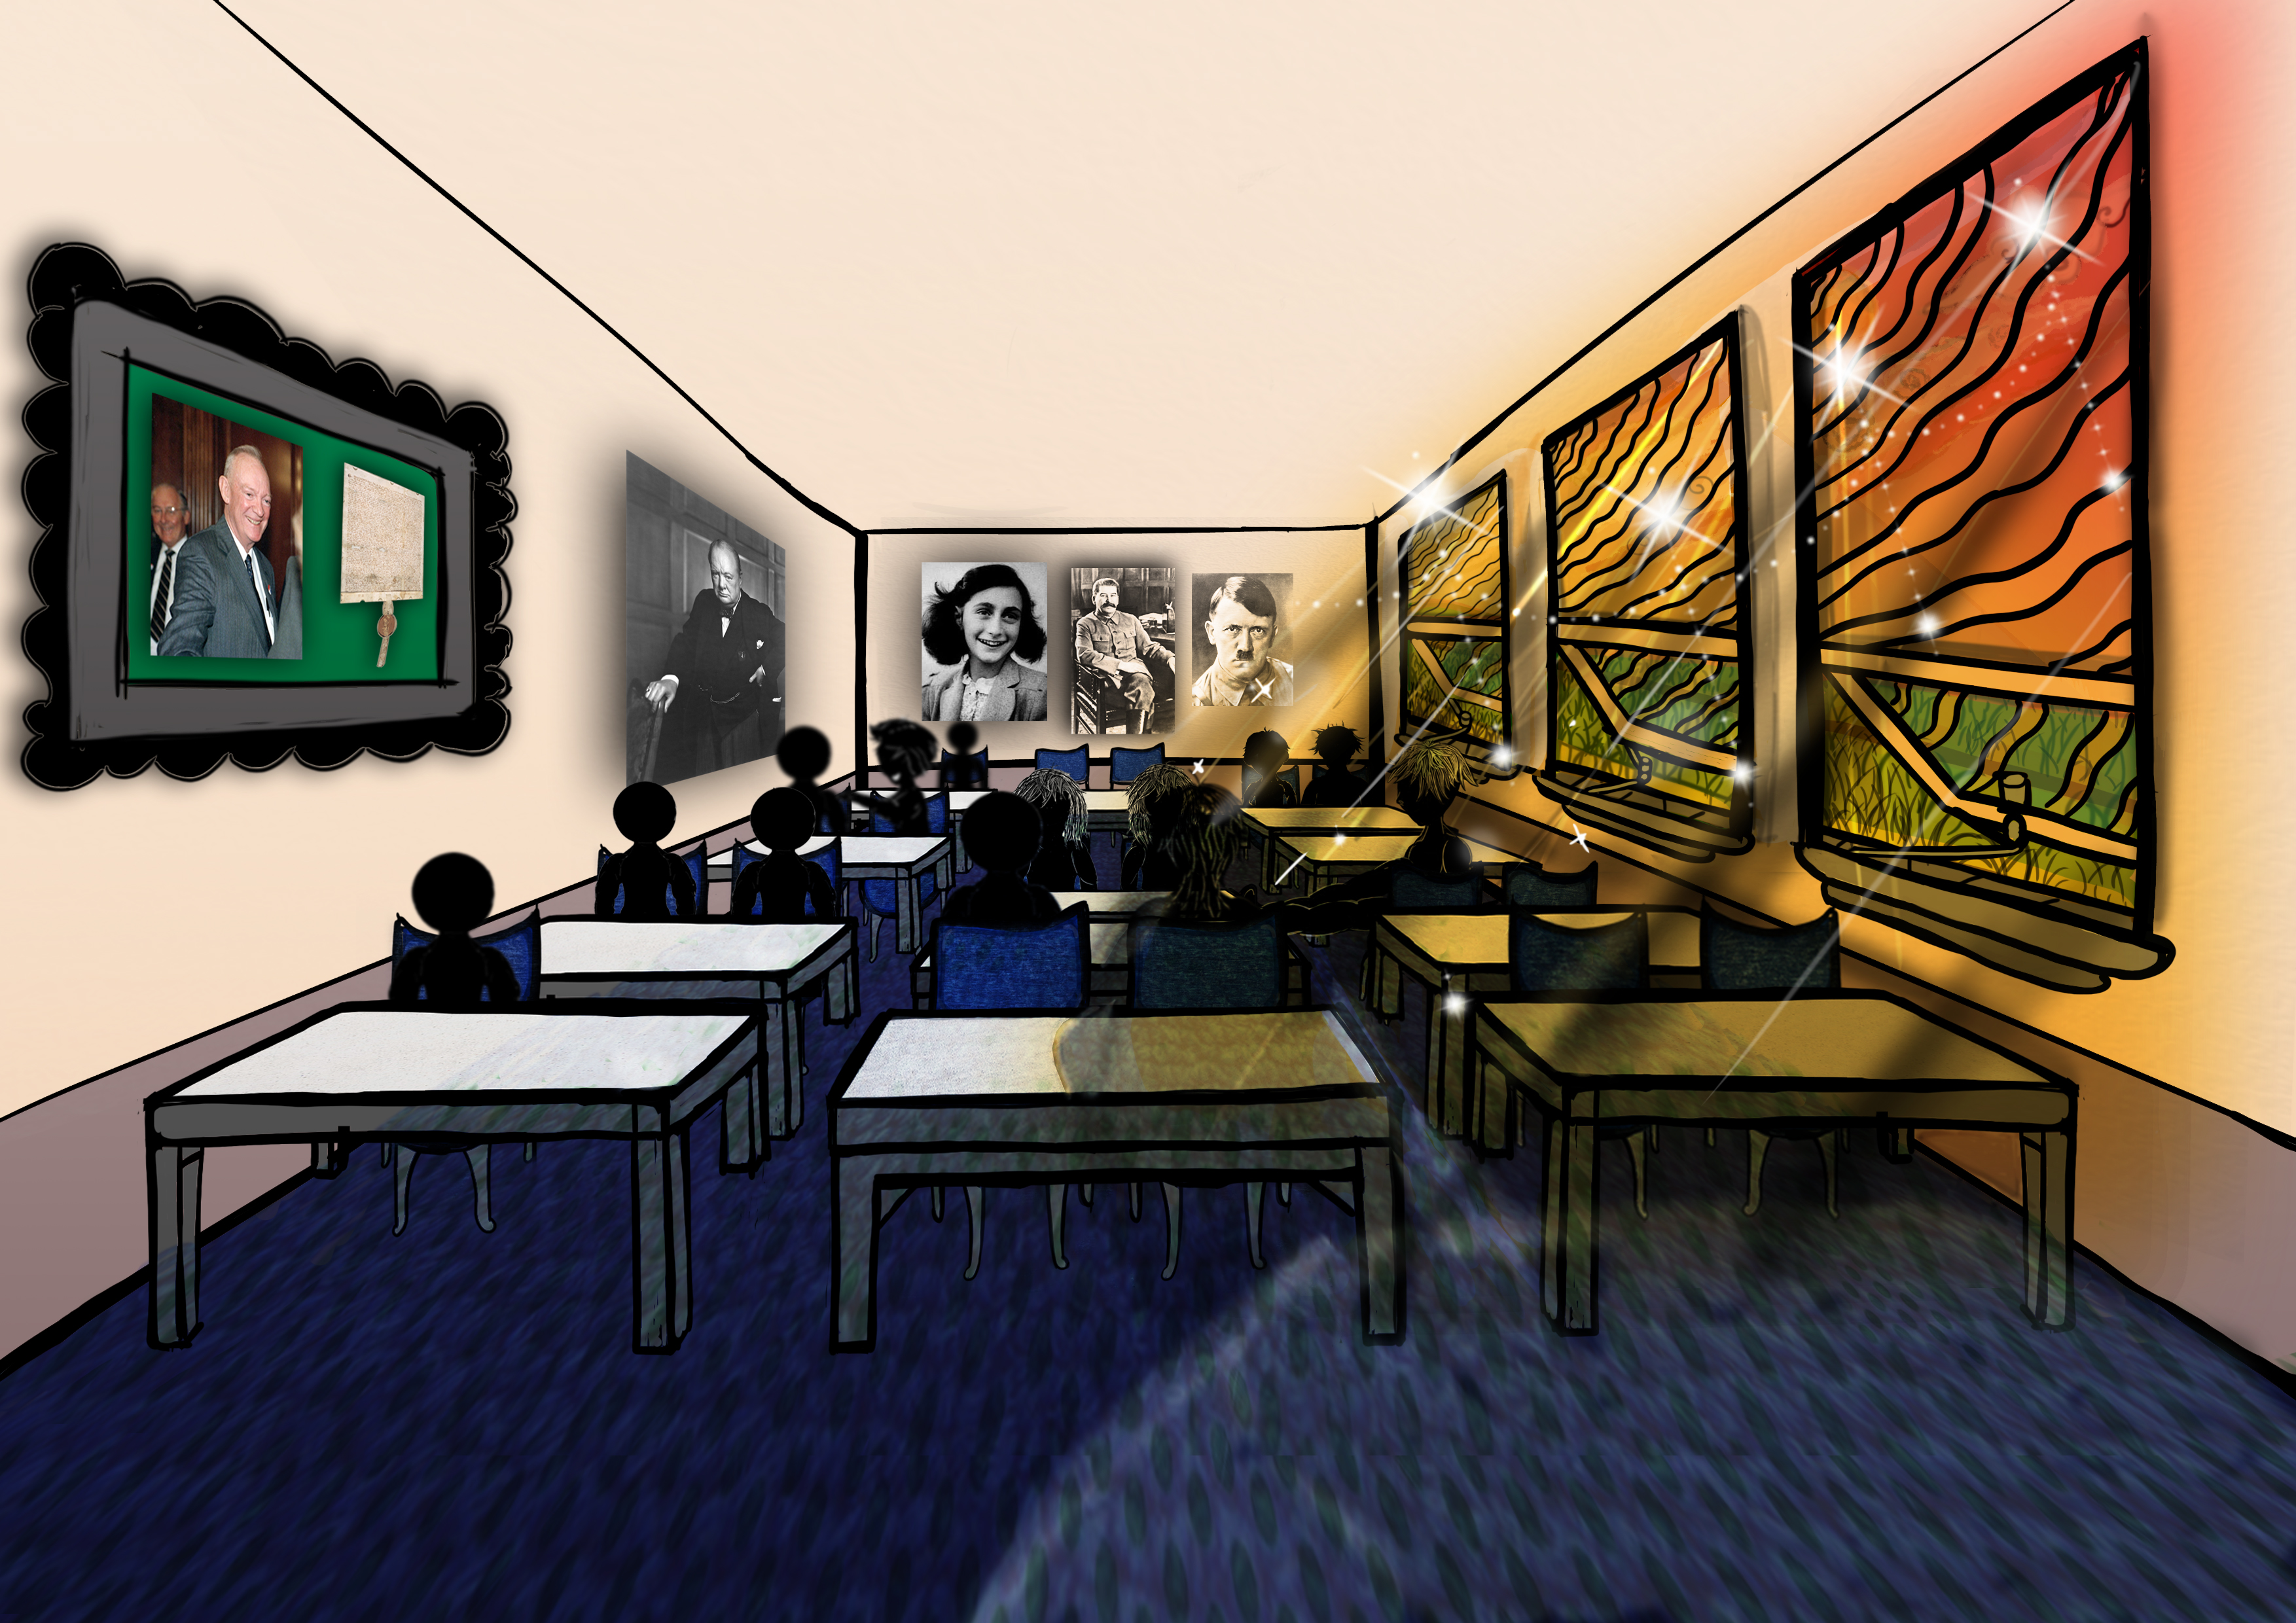 My old history classroom that I designed for my animation and if you want to find more of my work visit @jokgudraws on insta